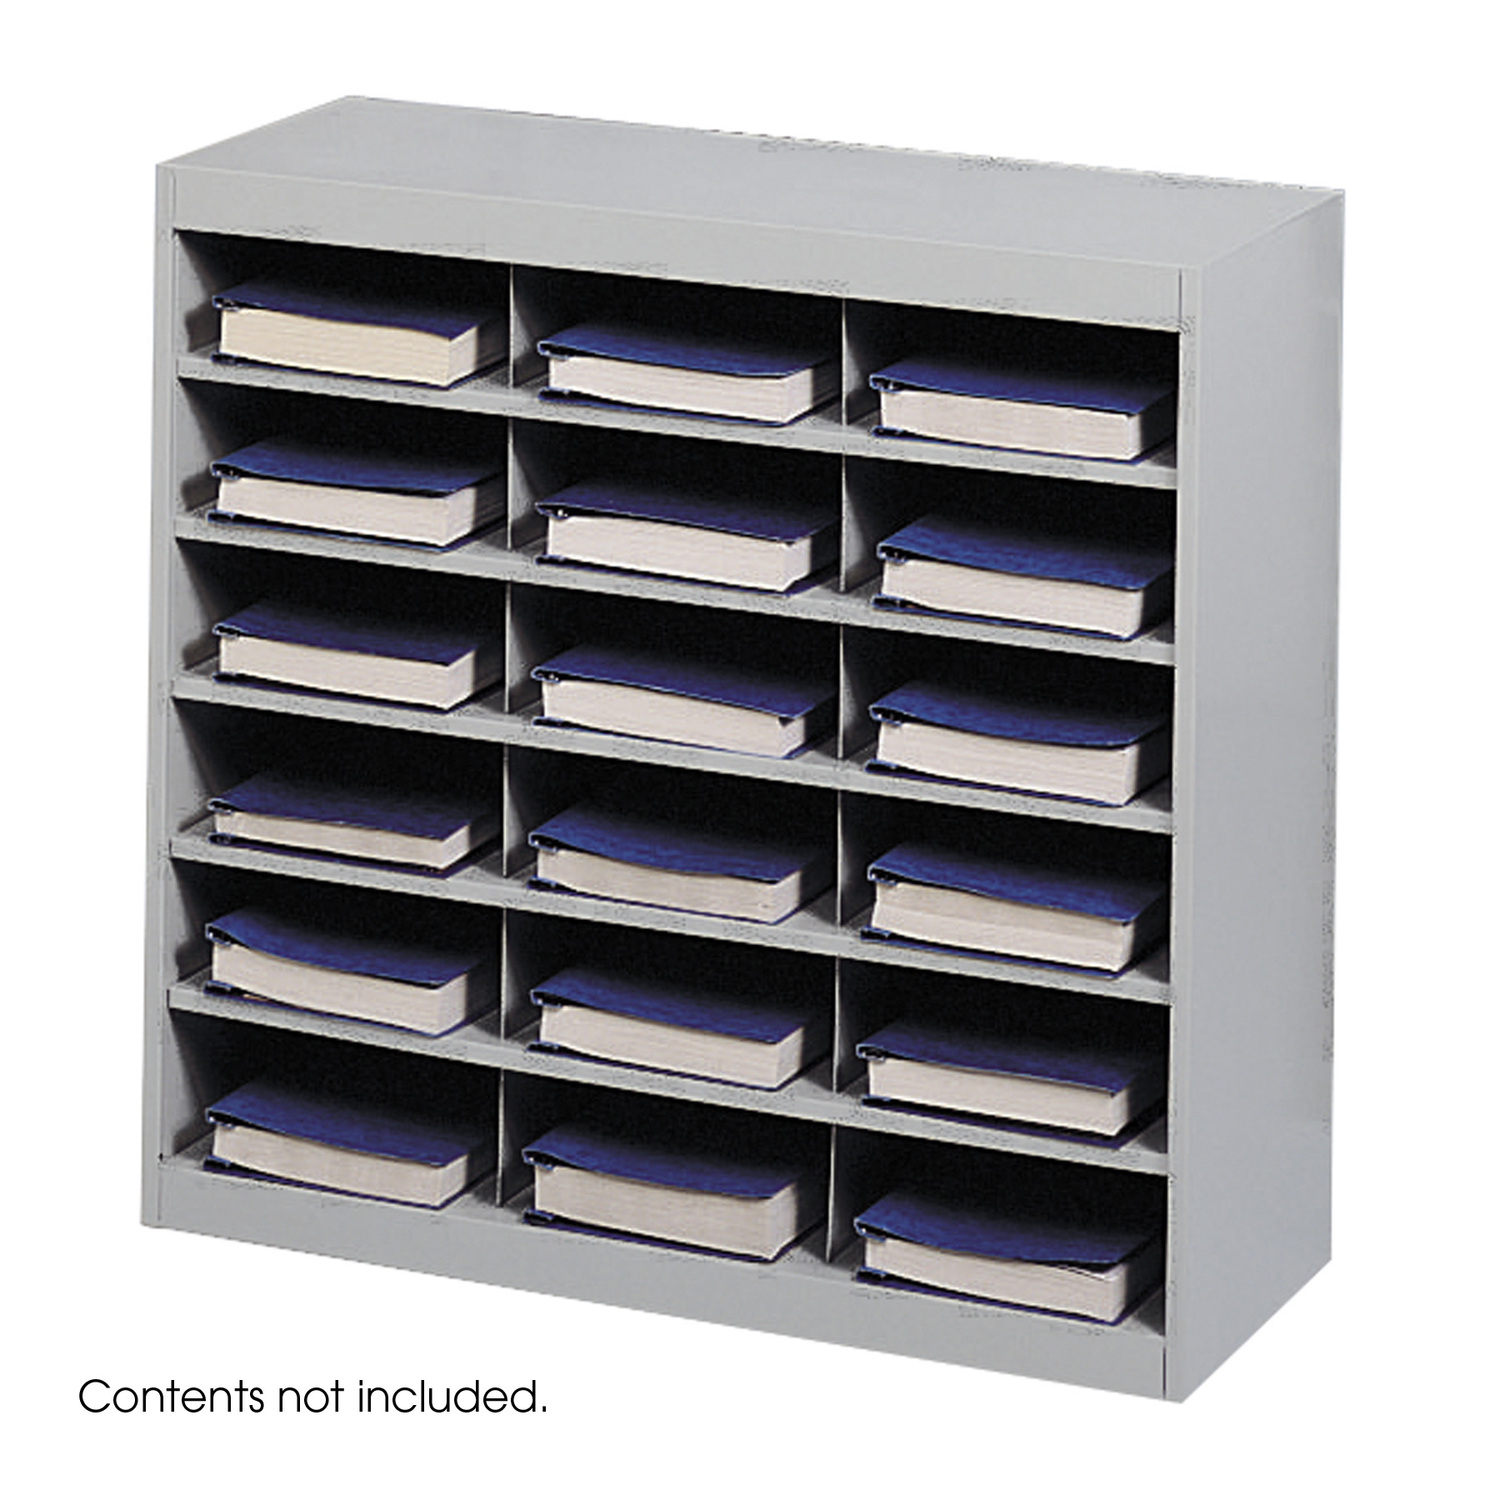 Safco EZ Stor Steel Project Organizer, 30 Compartments 18